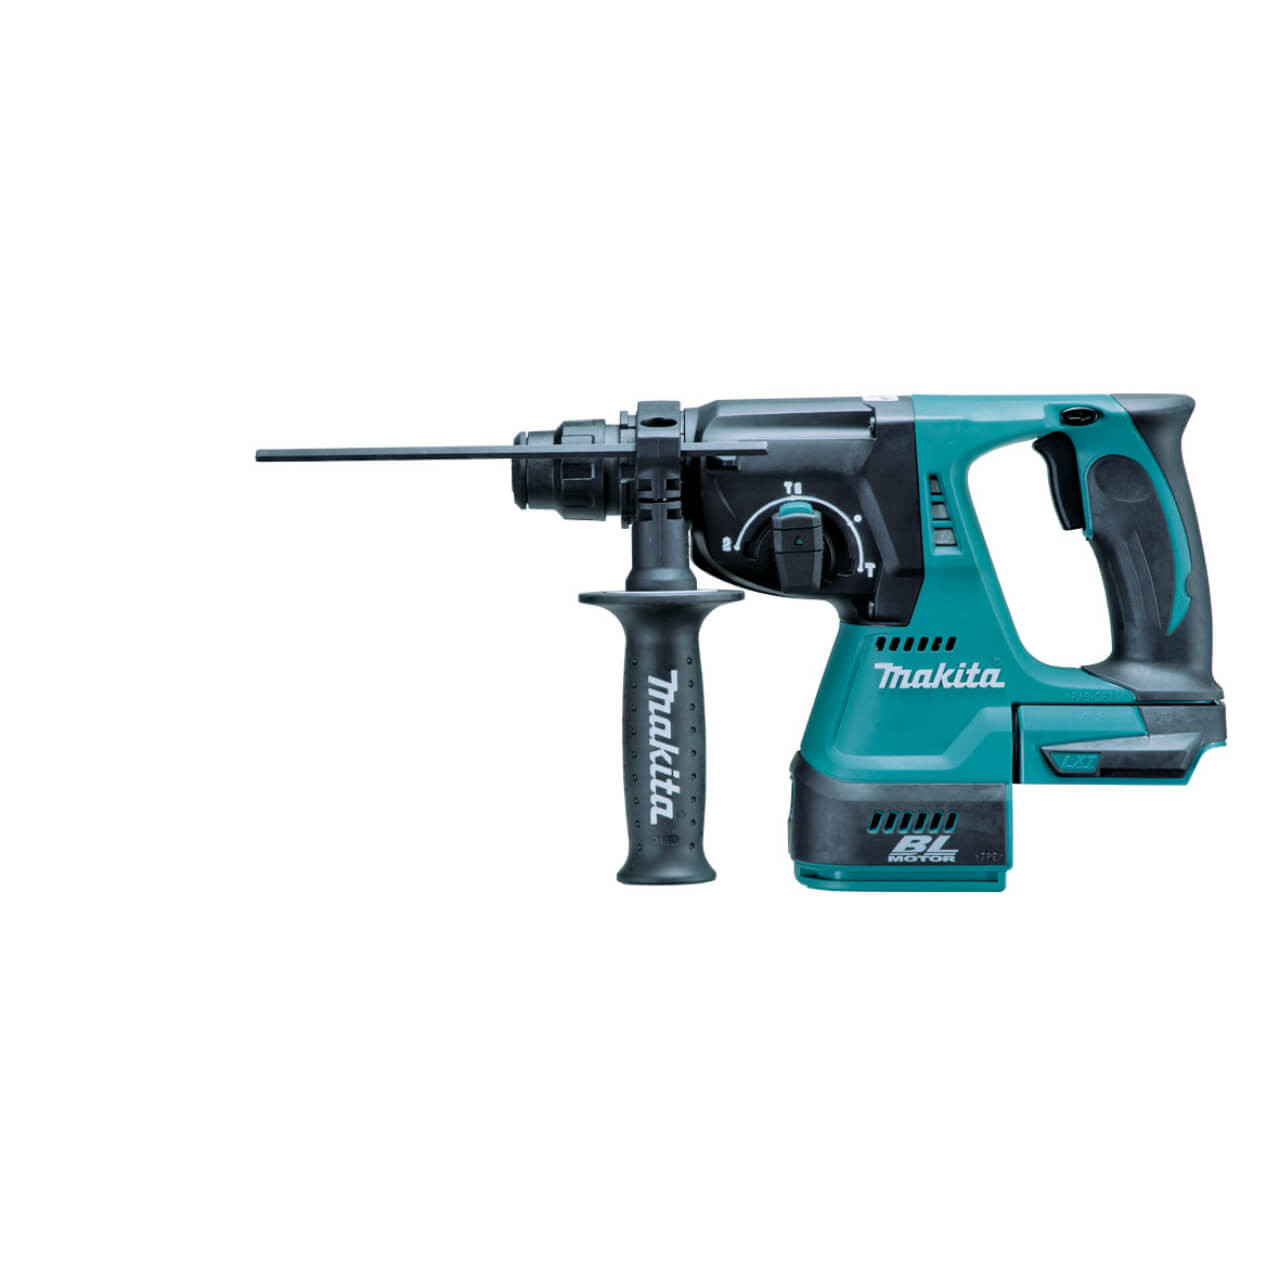 Makita 18V BRUSHLESS 24mm Rotary Hammer Kit - Includes 2 x 5.0Ah Batteries. Rapid Charger & Carry Case